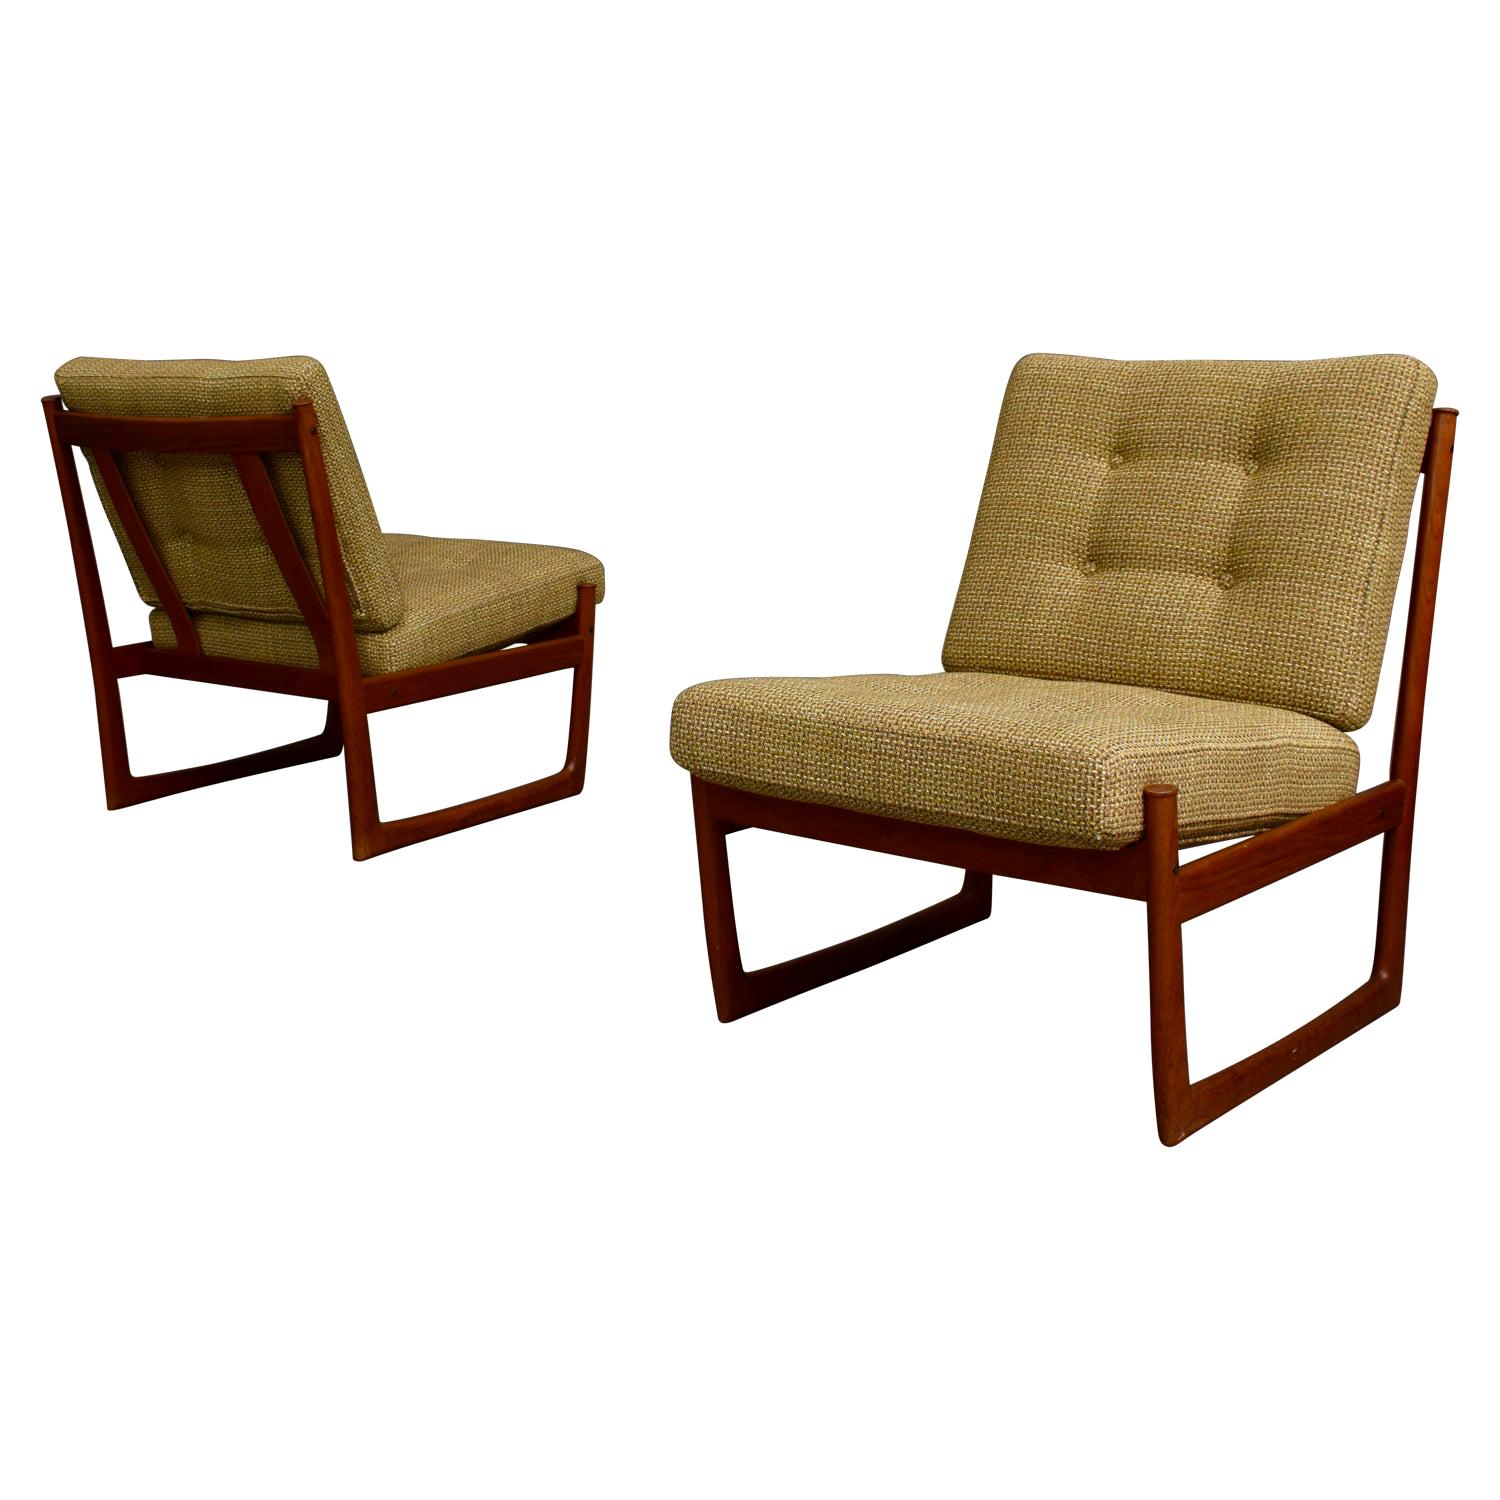 Pair of Danish Teak Lounge Chairs by Peter Hvidt and Orla Mølgaard, circa 1960